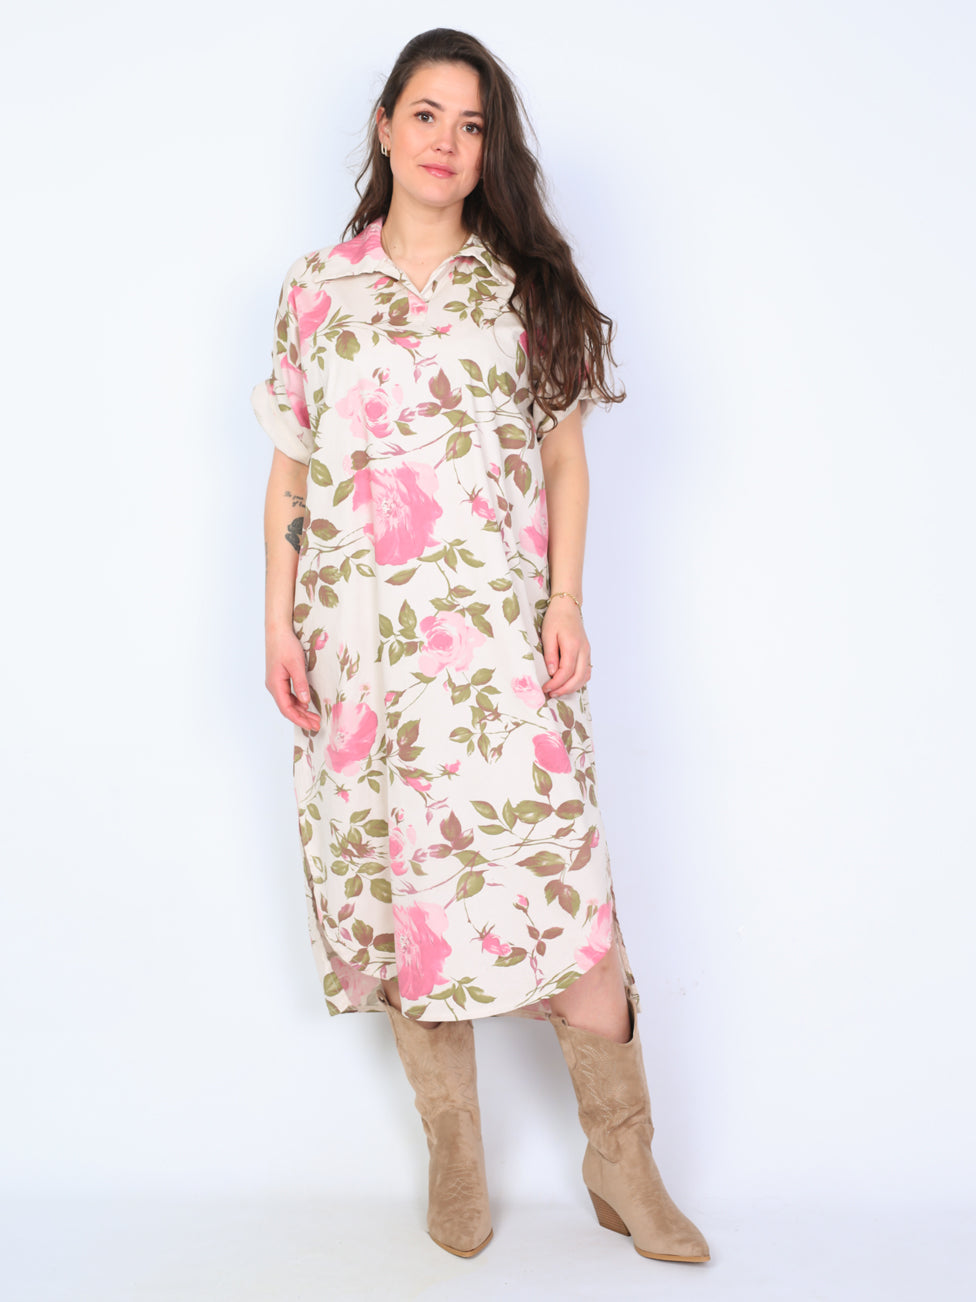 Krone 1 shirt dress with floral print and slit